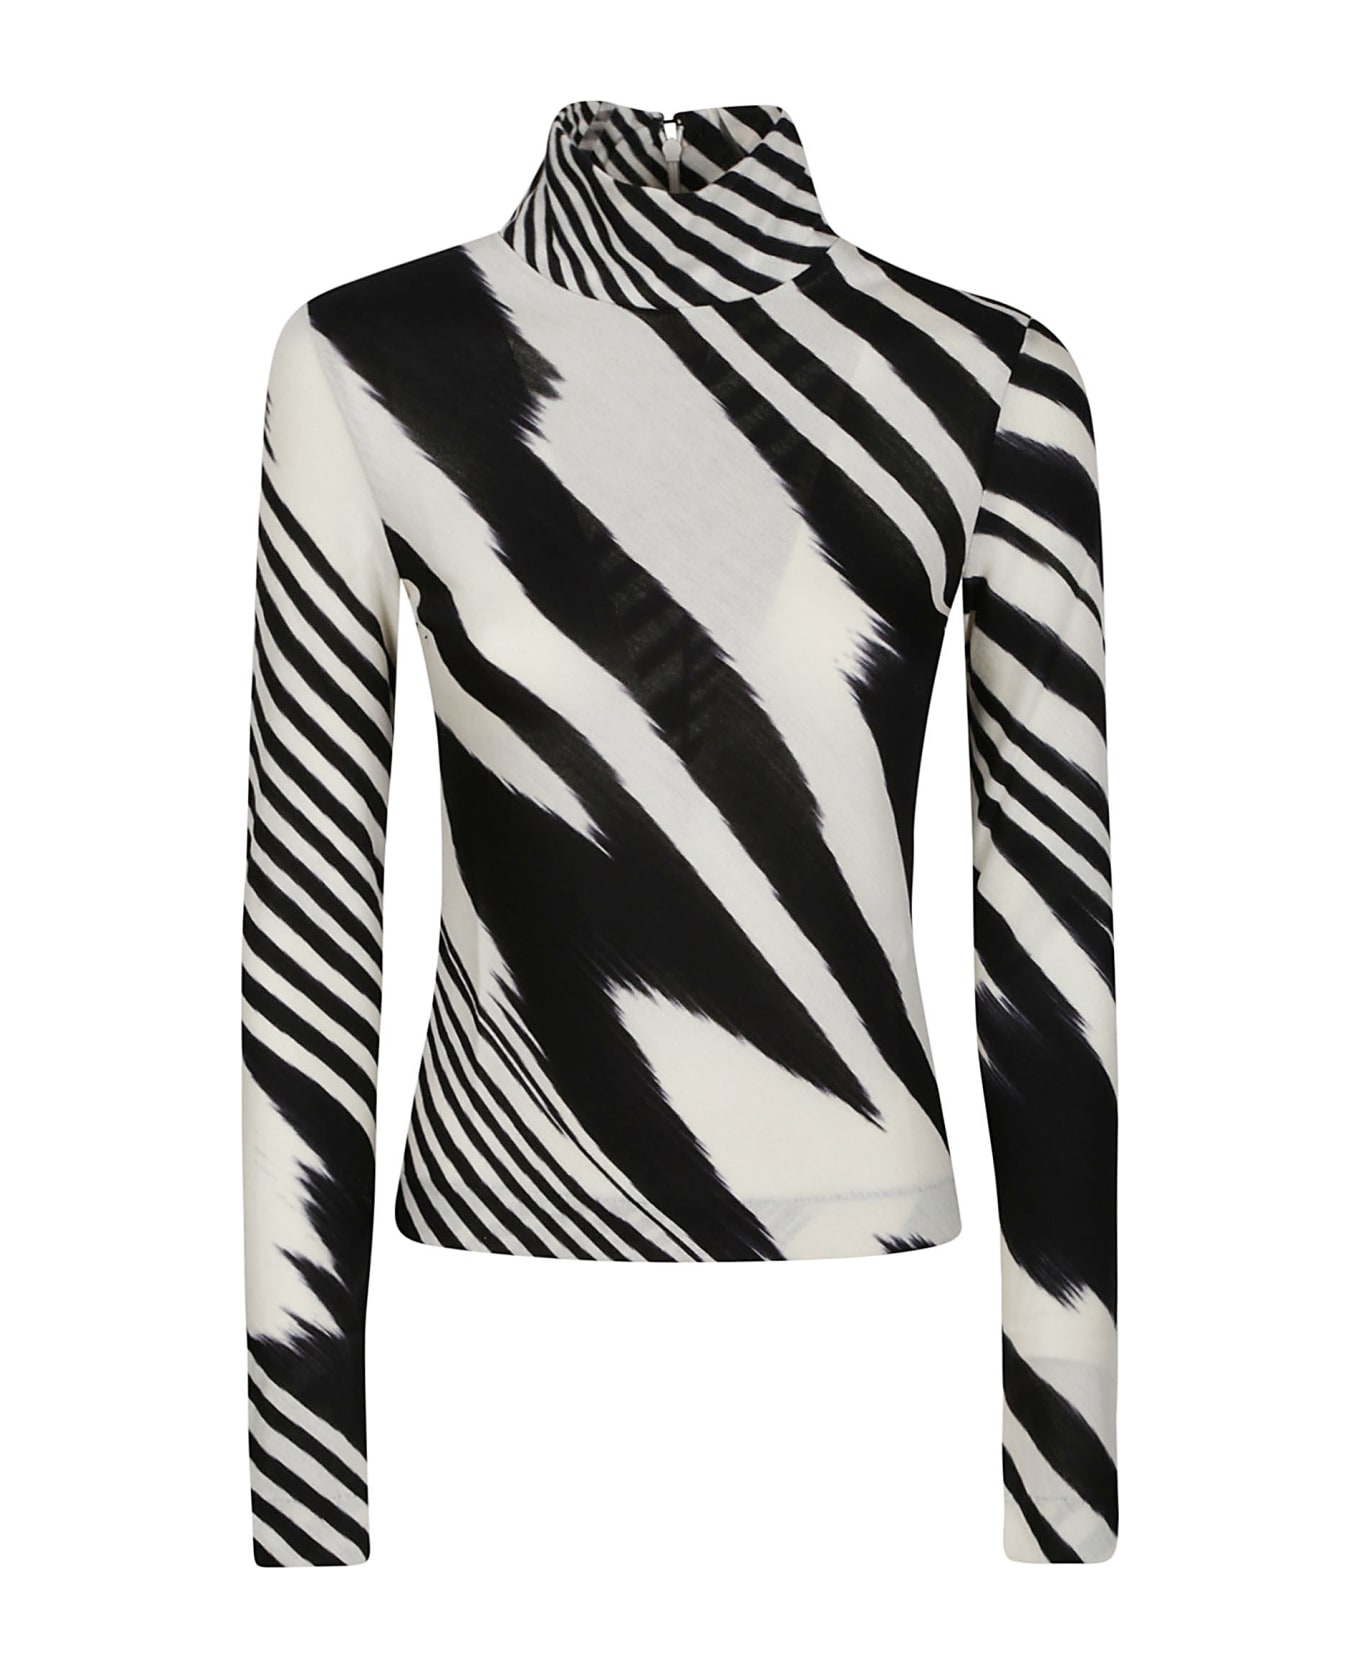 Missoni Turtle Neck Sweater - Black/white Space Dyed